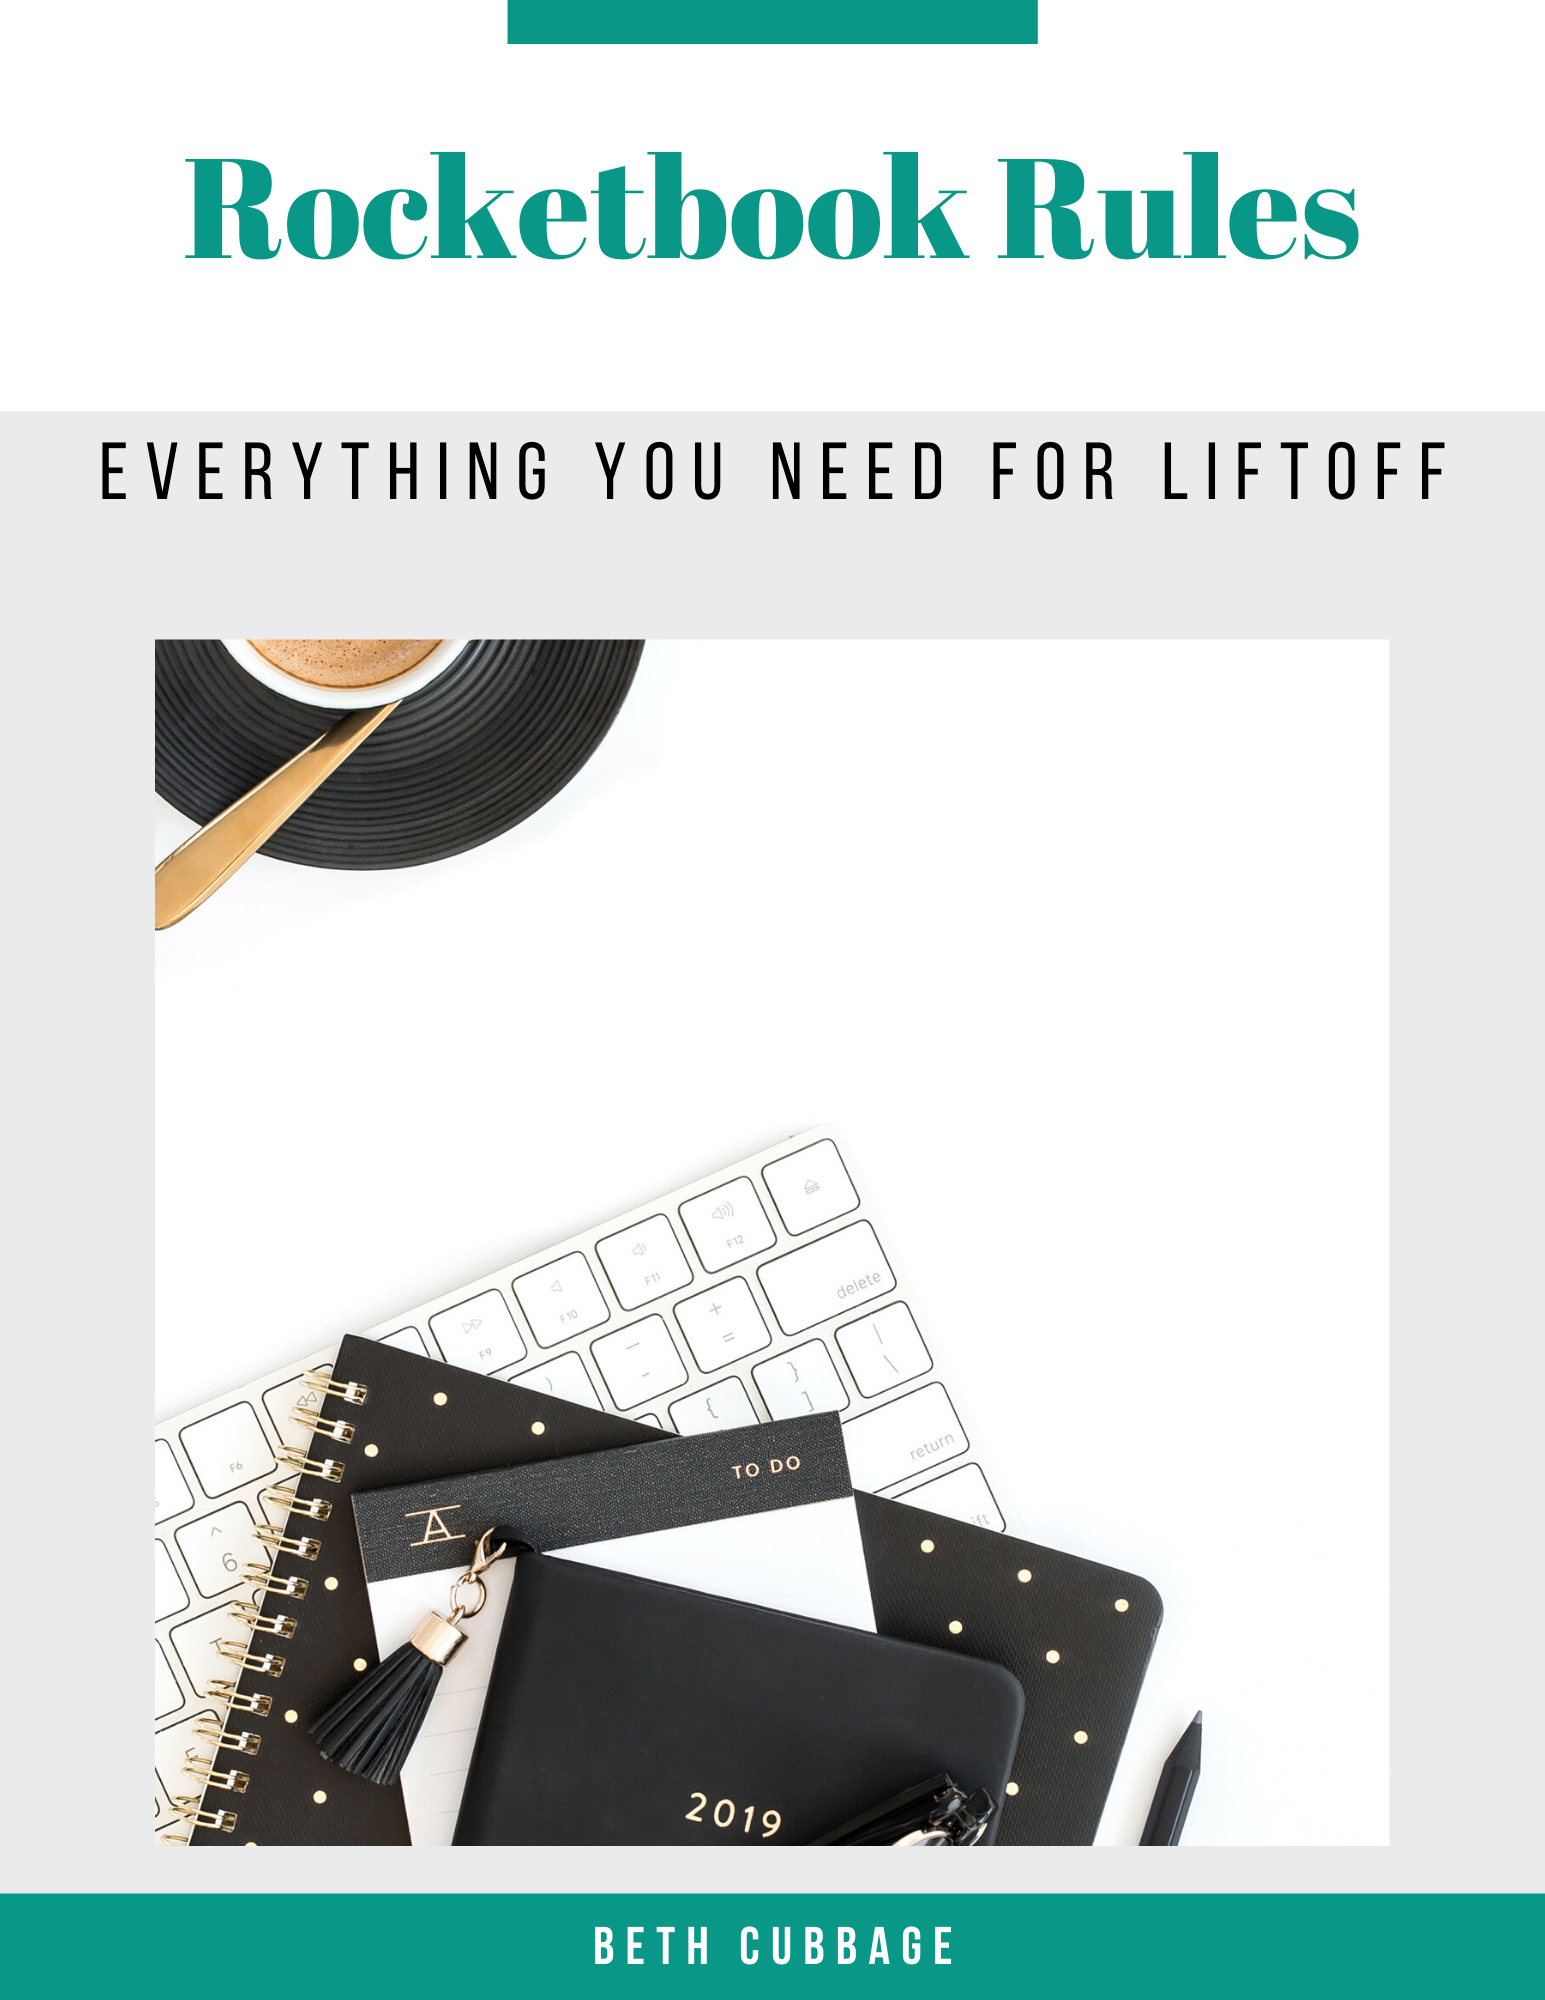 Ready to get your new Rocketbook off the ground? This e-book will help you set up your notebook, get inspired, and more.